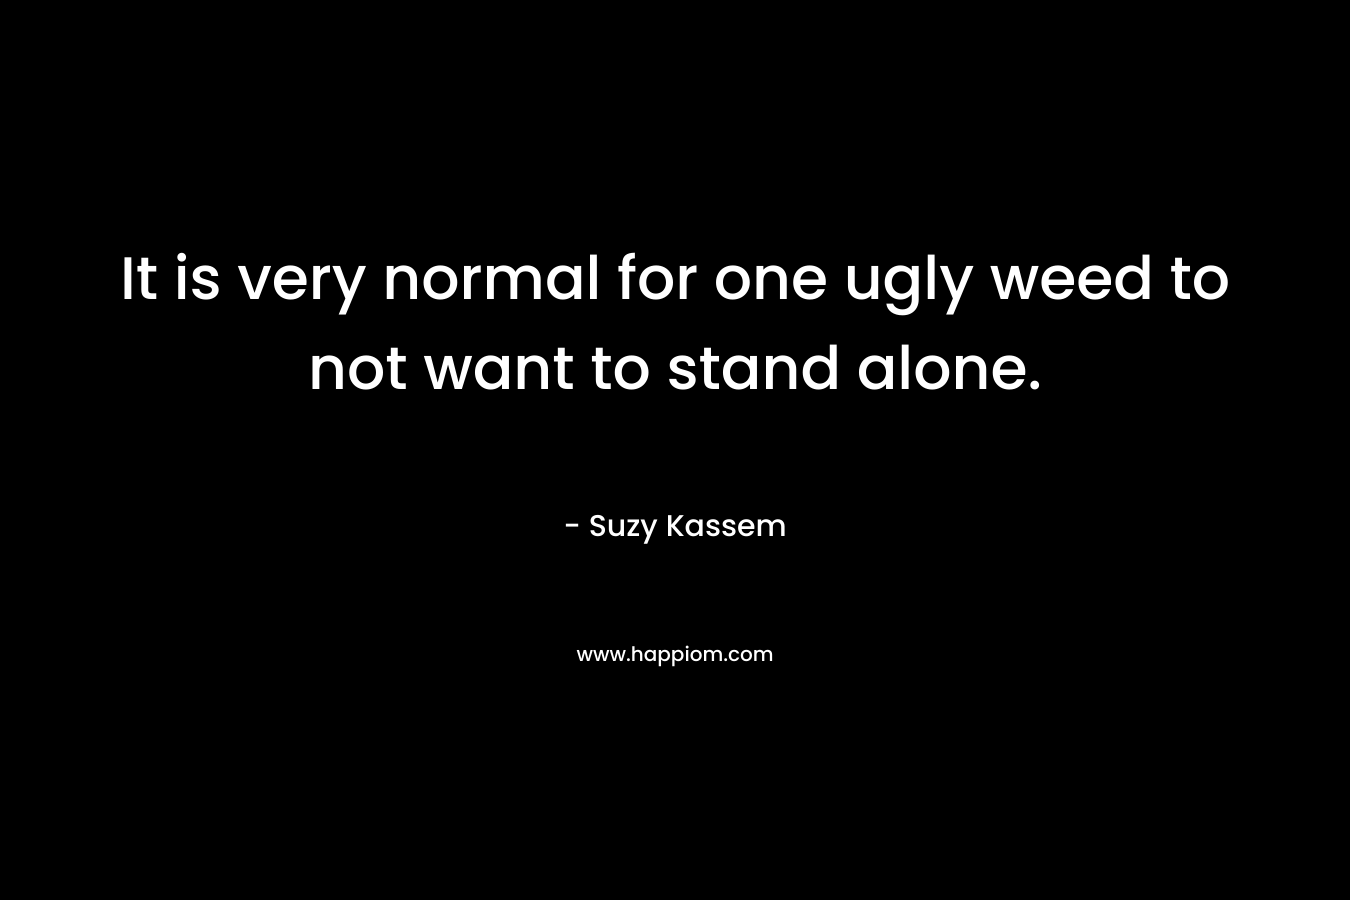 It is very normal for one ugly weed to not want to stand alone.